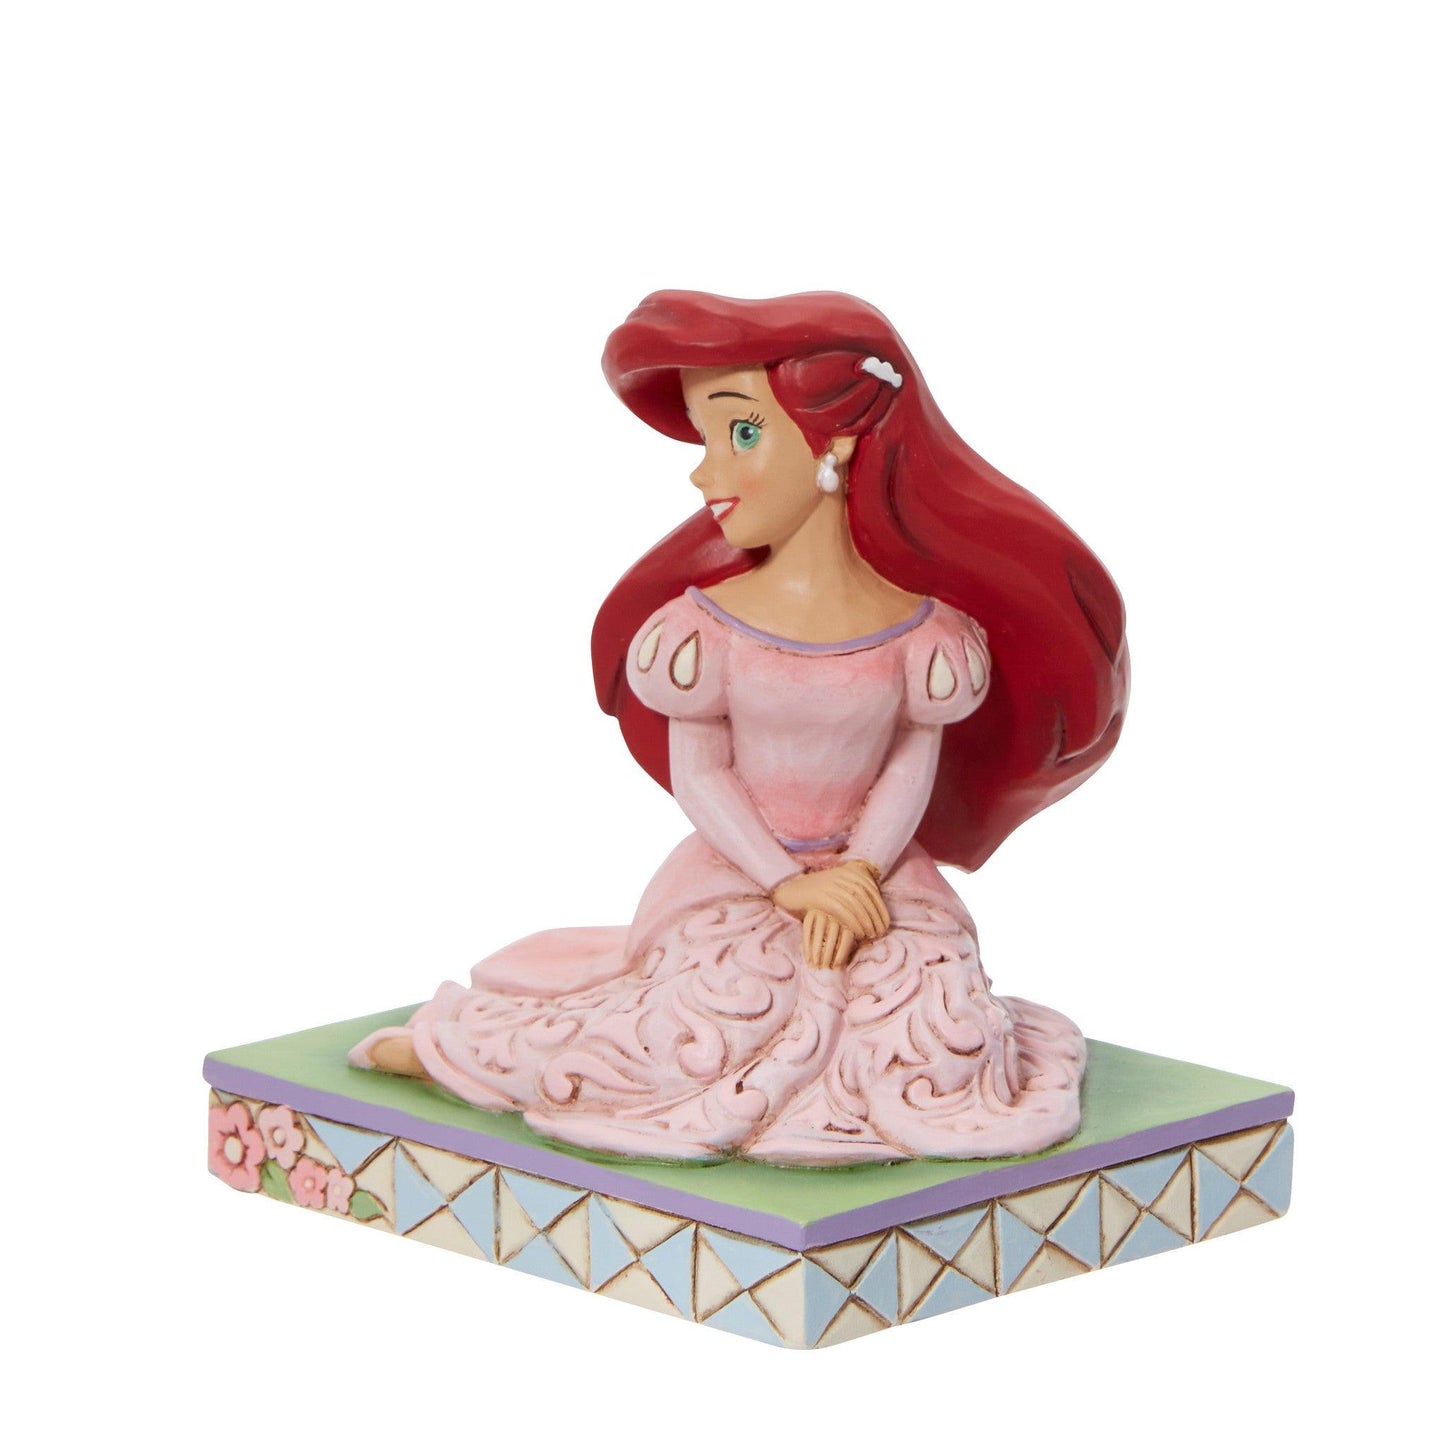 Ariel Personality Pose Figurine - Gallery Gifts Online 